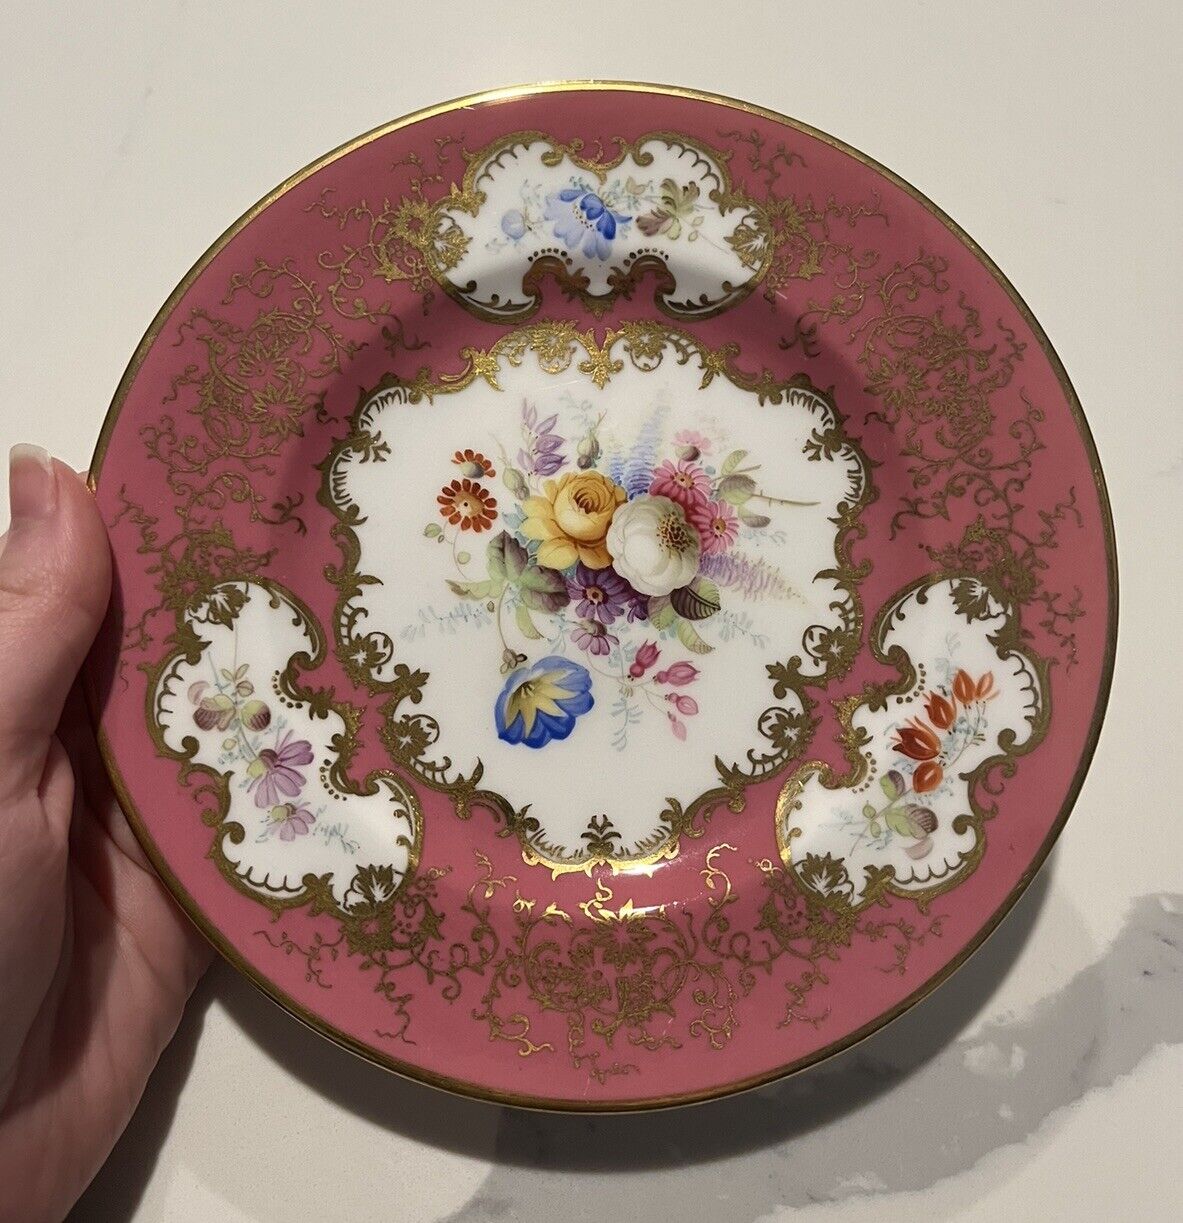 Antique Coalport Plates Old Period 1800-1830 Hand Painted Pink & Gold 6919 #8